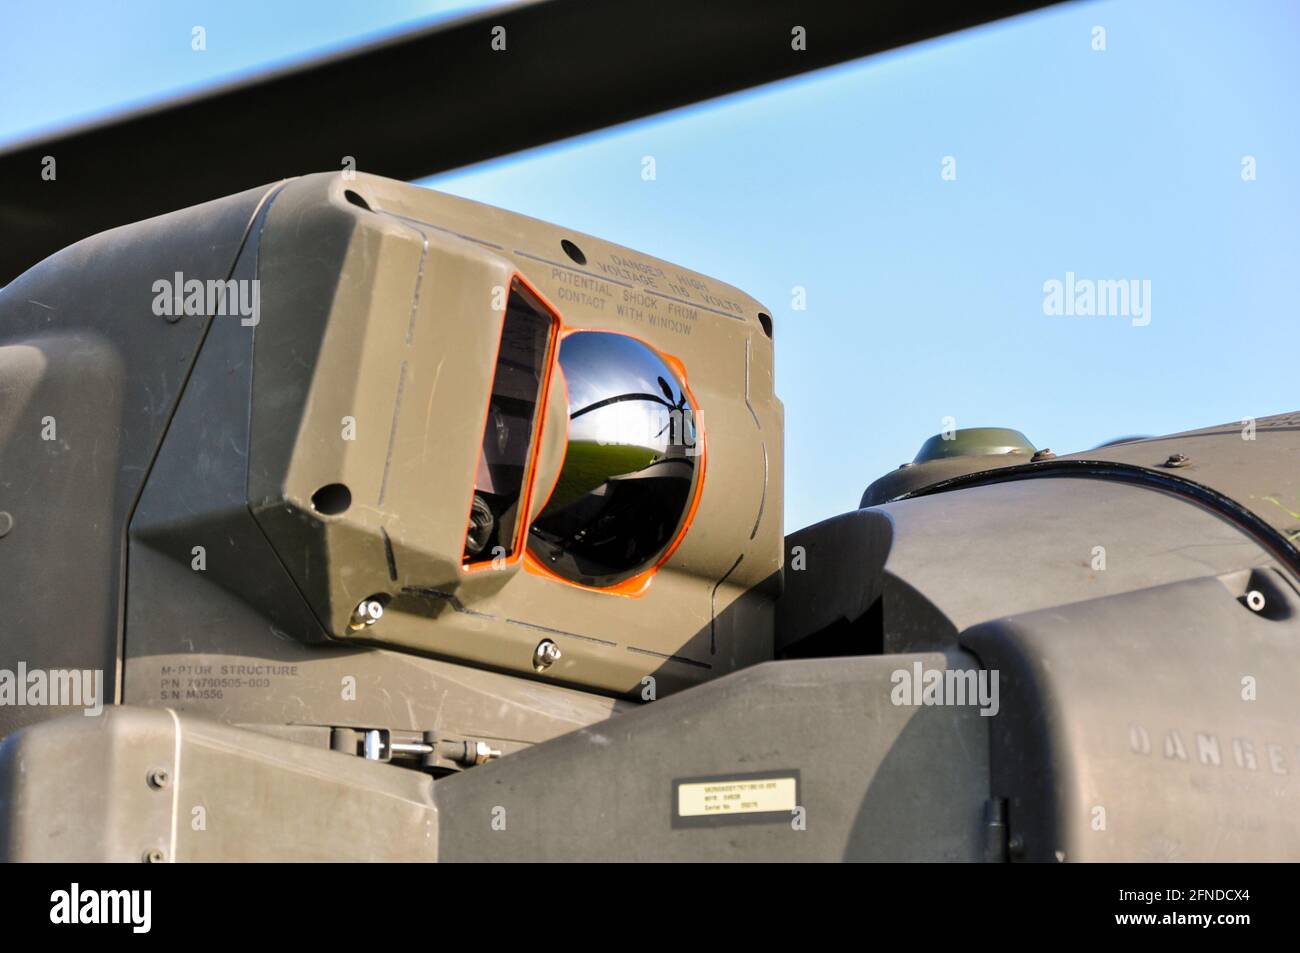 Detail of sensor on a AgustaWestland WAH-64 Apache gunship helicopter of the British Army, Army Air Corps. Pilot Night Vision Sensor, PNVS. Mirrored Stock Photo